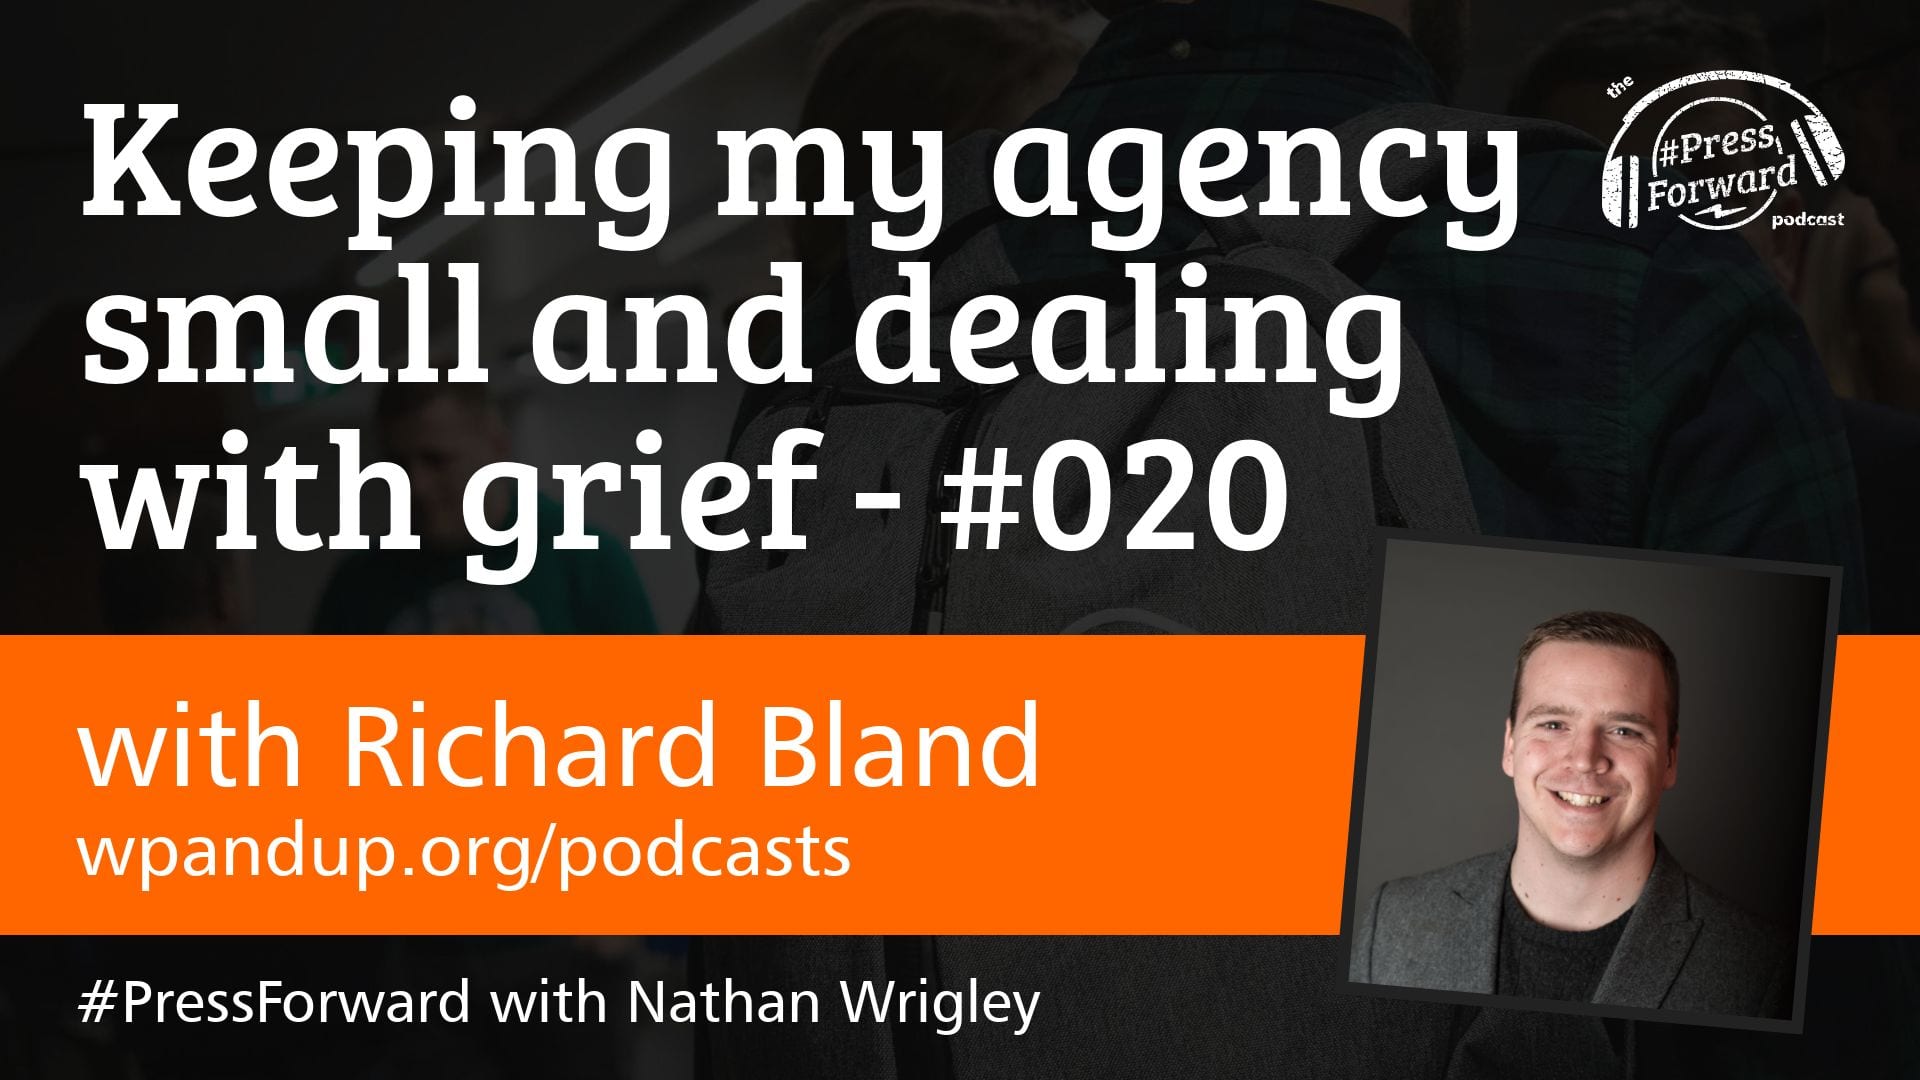 Keeping my agency small and dealing with grief - #020